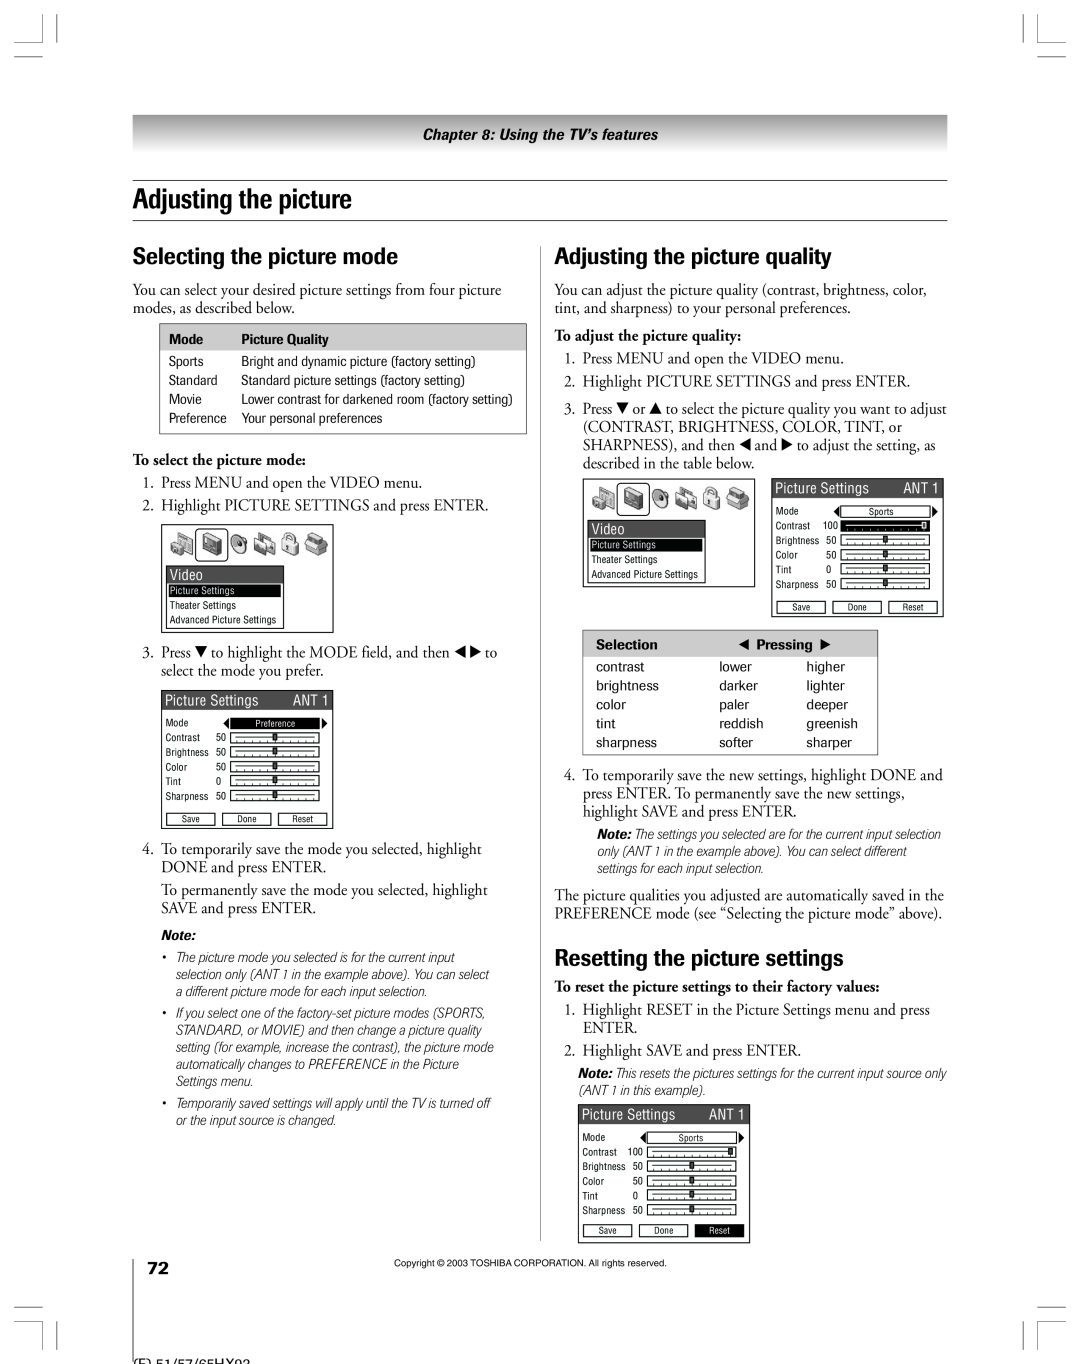 Toshiba 51HX93 owner manual Selecting the picture mode, Adjusting the picture quality, Resetting the picture settings 